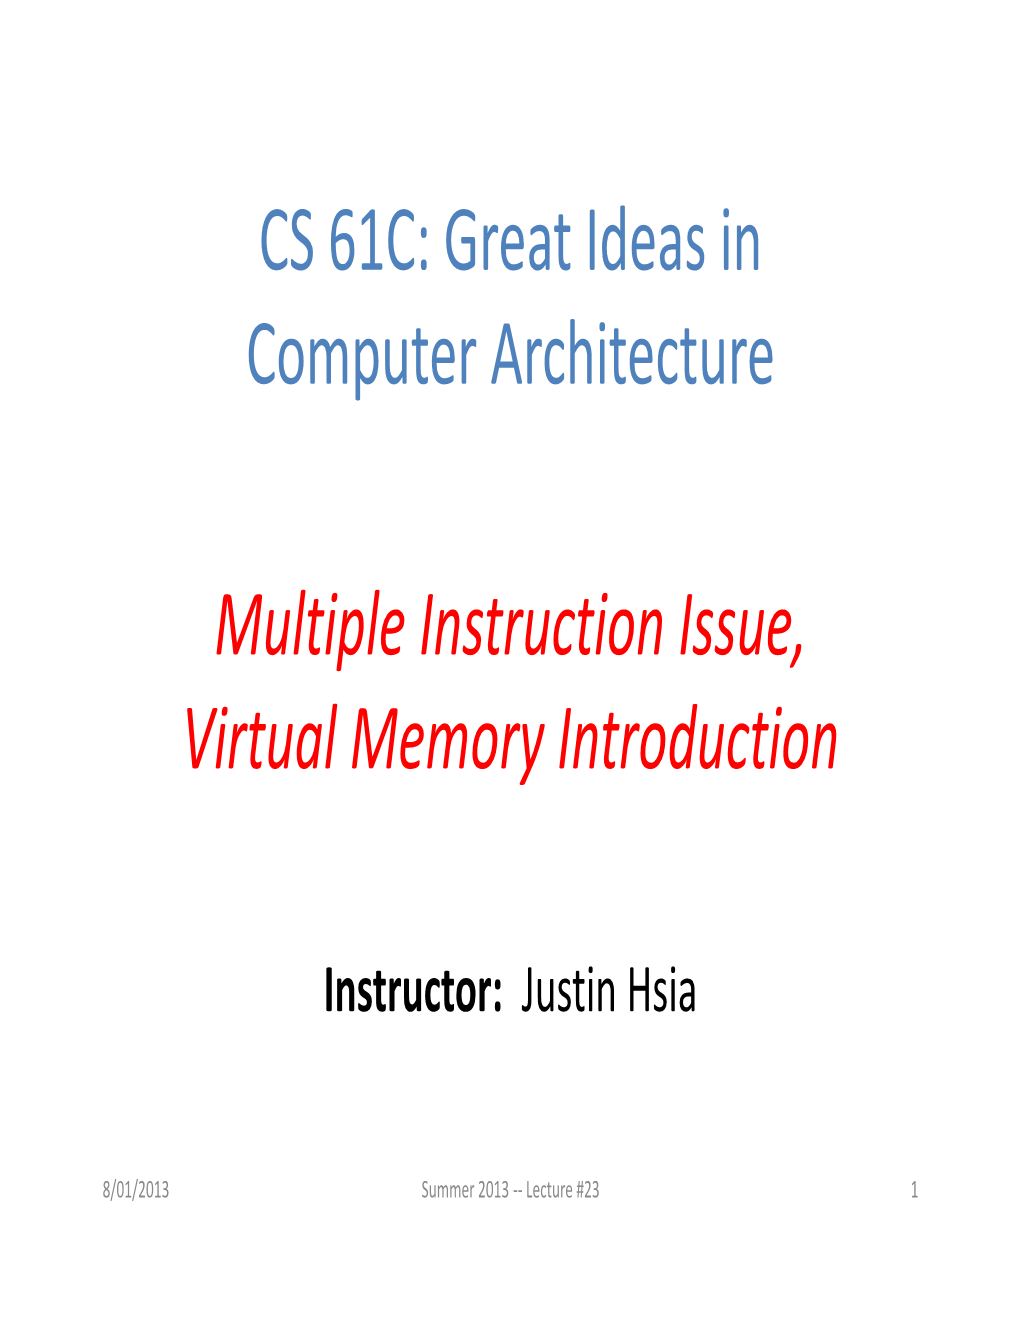 CS 61C: Great Ideas in Computer Architecture Multiple Instruction